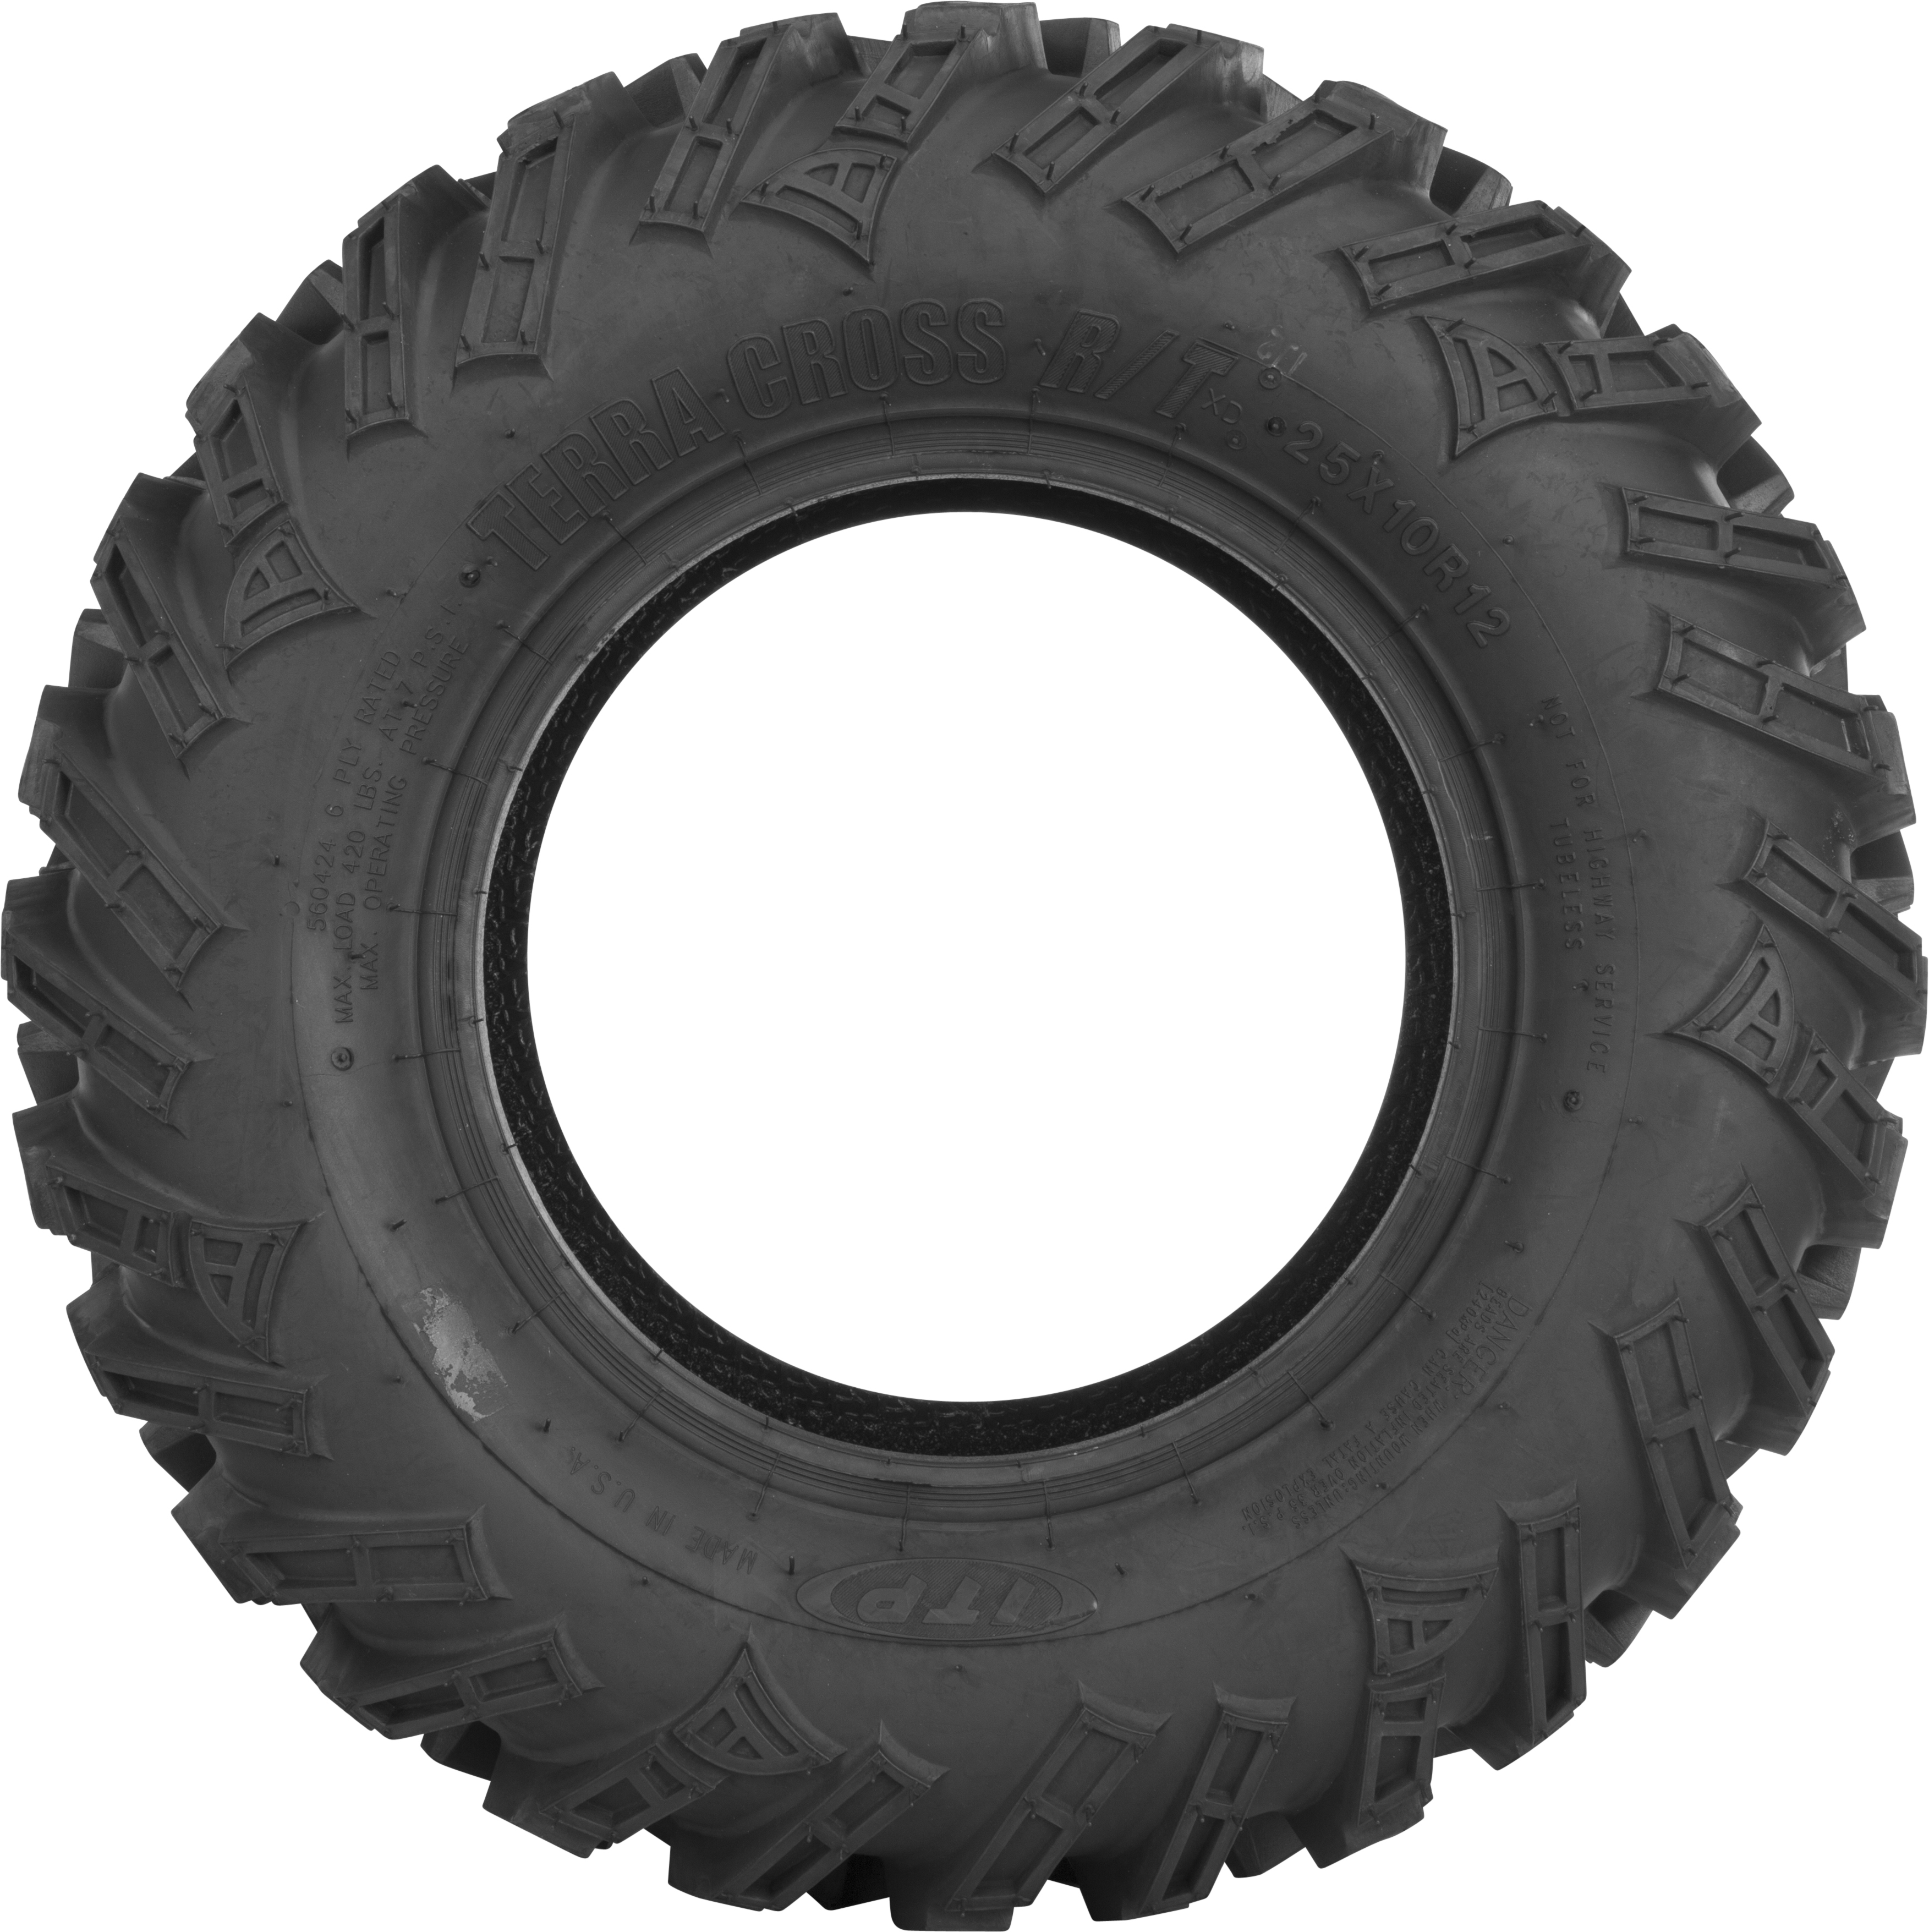 TERRACROSS R/T REAR TIRE 26X11-12 6 -PLY - Click Image to Close